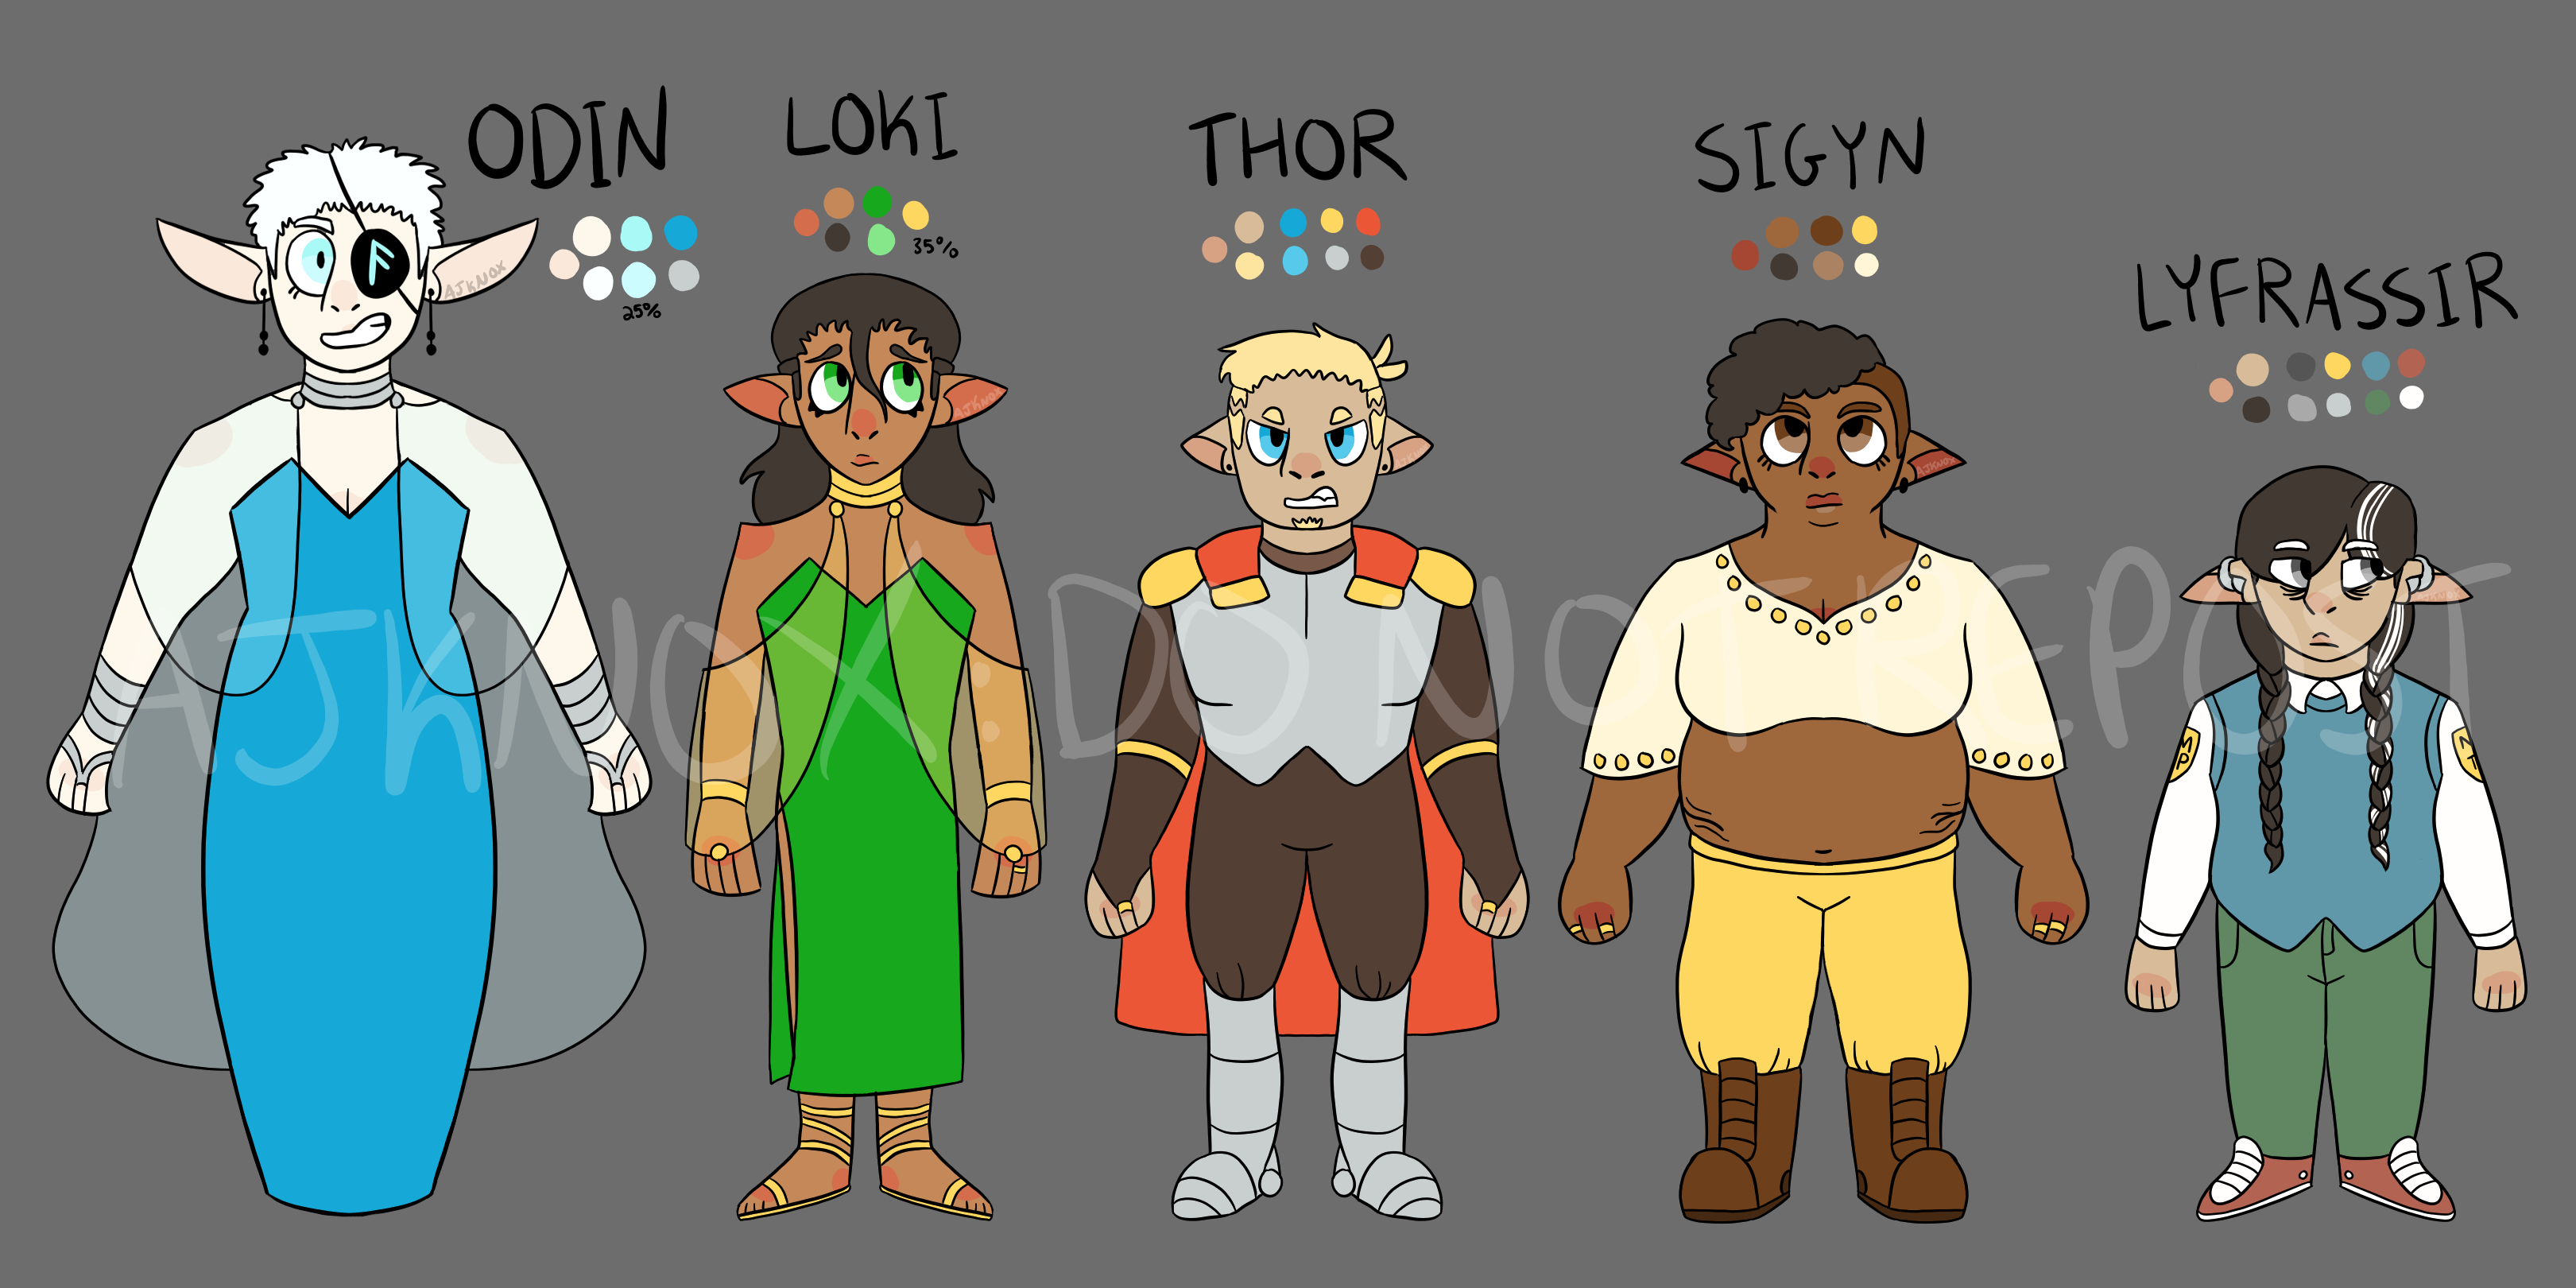 character design lineup of five characters with pointed ears from the bifrost incident. details of each character will follow.
odin has pale skin, a white buzzcut, and an eyepatch with the ansuz rune. she has long pointy ears and light blue eyes. she wears silver jewelry, a blue dress that hides her feet, and a translucent cape. her expression looks excited about something probably evil.
loki has dark skin, shoulder-length black hair, and green eyes. she wears gold jewelry and sandals, and a green dress. she looks concerned.
thor has tan skin, blue eyes, and short blonde hair with a lightning bolt shaved into the undercut. he has silver armor and leg prosthetics, with gold shoulder plates. the fabric underneath is dark brown. he has a red cape and is scowling.
sigyn has dark skin, brown eyes, and black hair that’s shaved on one side.she wears a blouse and yellow pants with boots. she has stretch marks on her stomach, and is looking up in a determined way.
lyfrassir has tan skin, gray eyes, and hearing aids on each ear. they have dark hair in two braids, with some gray streaks. they wear a blue vest, green pants, and gray-red shoes. they have a yellow NMTP (new midgard transport police) badge on each shoulder. they look tired and worried.